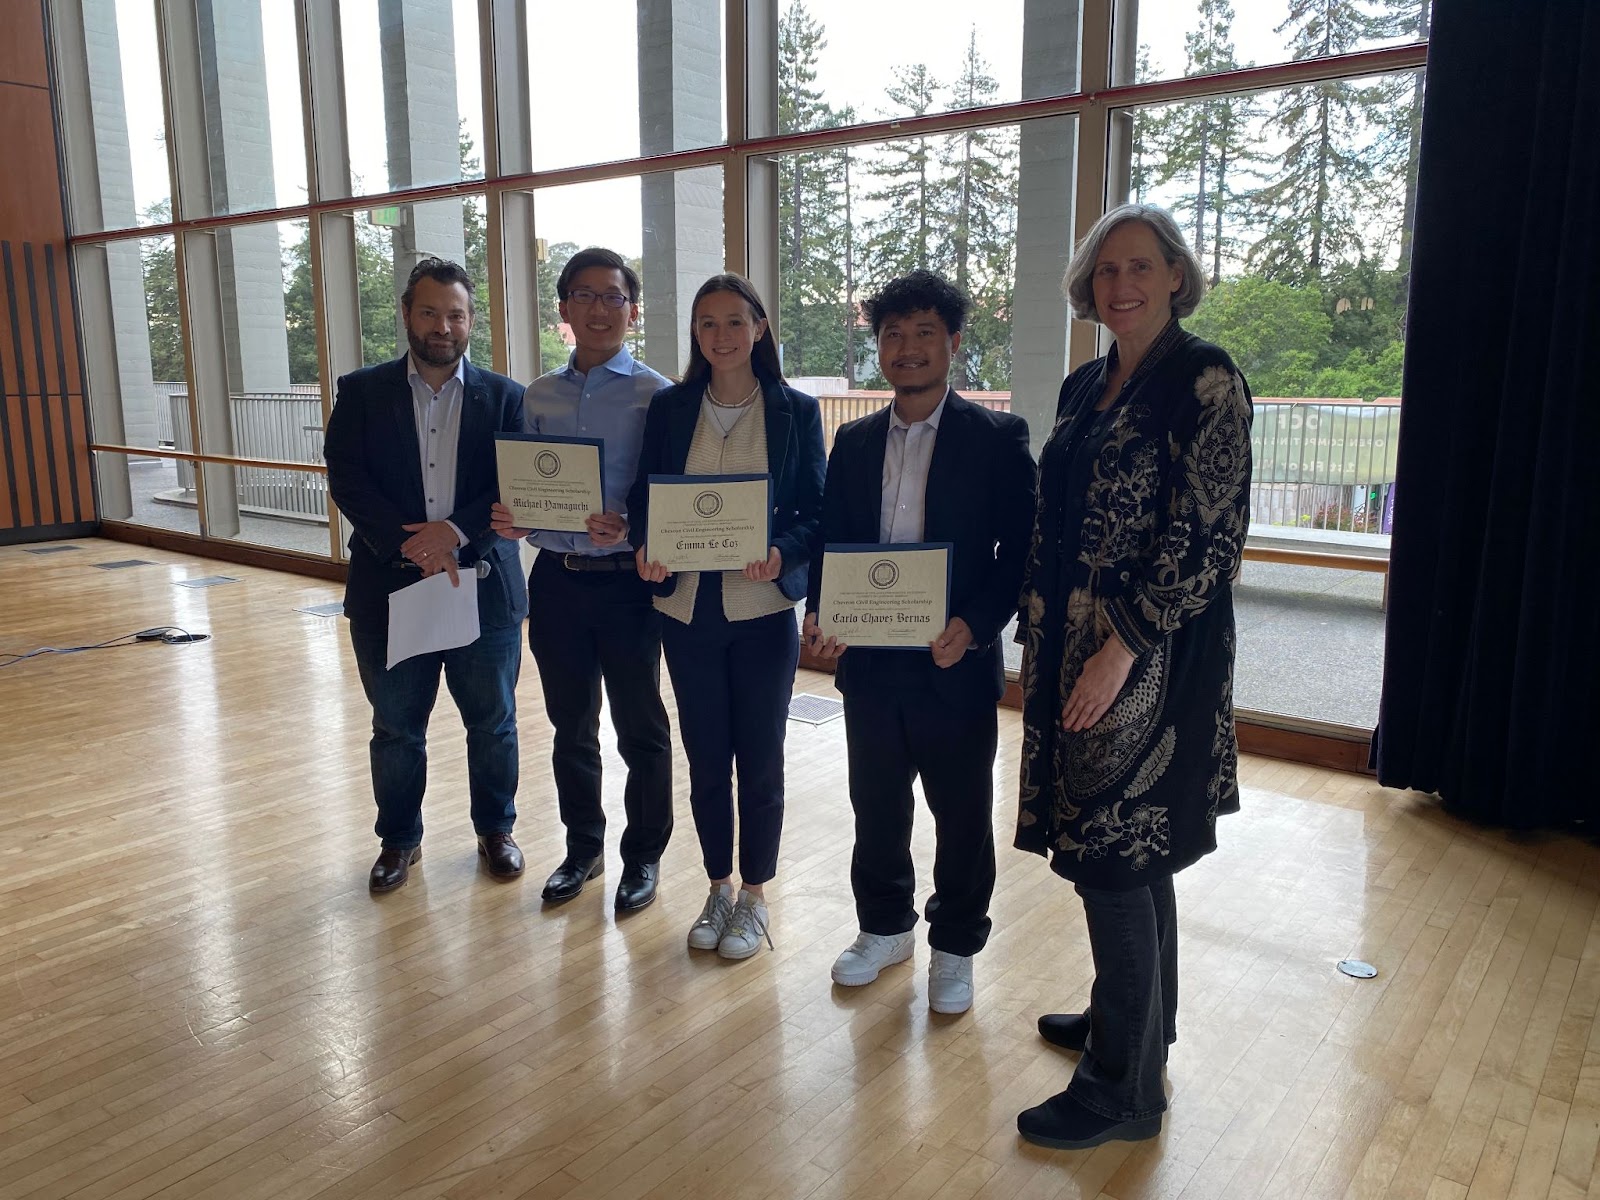 Chair Joan Walker (far right) and Dimitrios Konstantinidis (far left) present the Chevron Environmental Engineering Scholarship to Michael Yamaguchi, Emma Le Coz, and Carlo Chavez Bernas (left to right). (Photo Credit: Erin Leigh Inama).